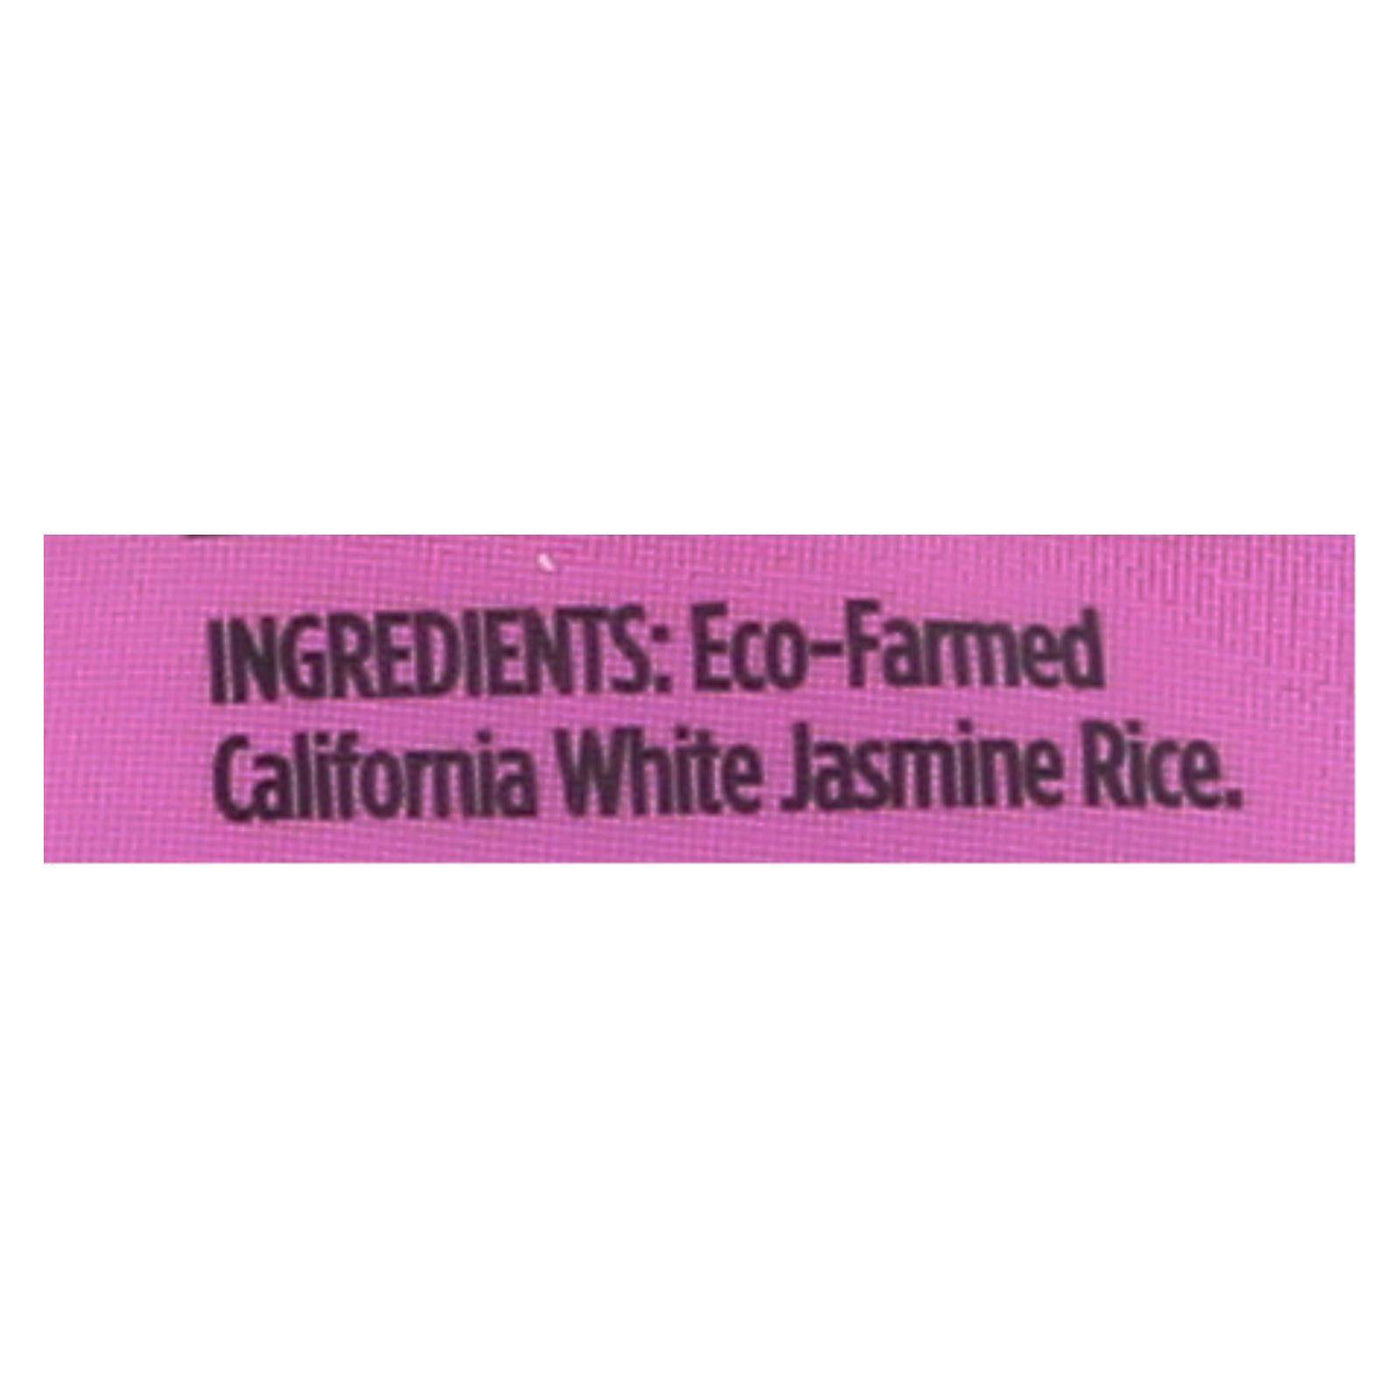 Buy Lundberg Family Farms White Jasmine Rice - Case Of 6 - 2 Lb.  at OnlyNaturals.us